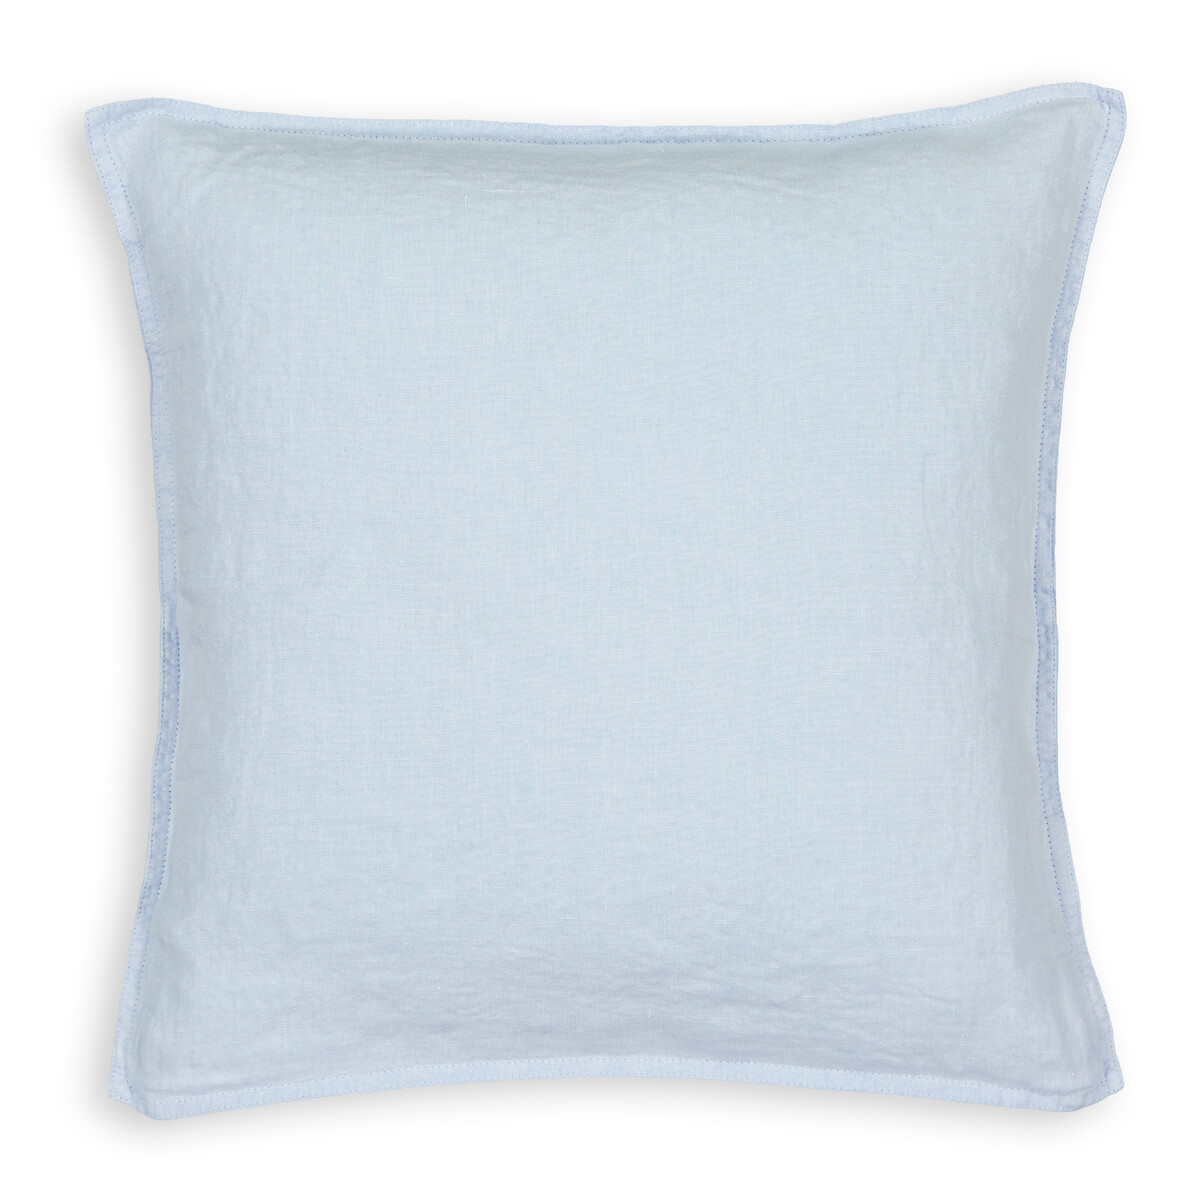 Linot 100% Washed Linen Square Cushion Cover